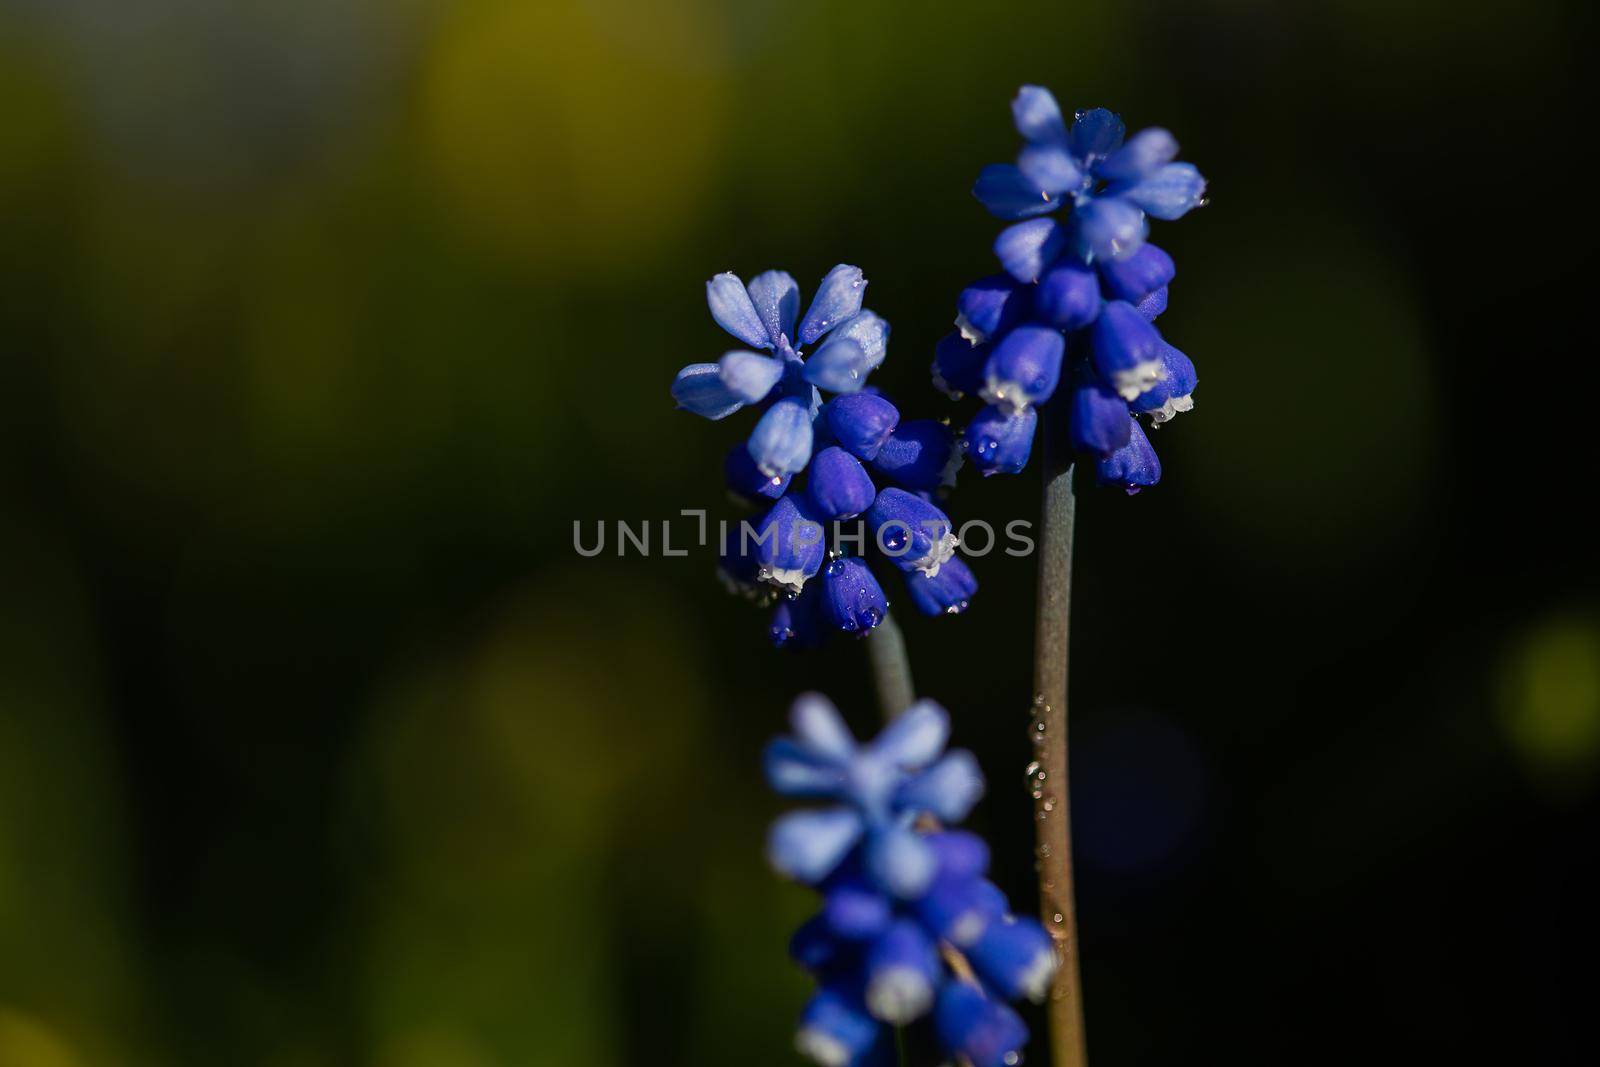 Muscari Hyacinth blue flowers grow on a flower bed in spring by galinasharapova